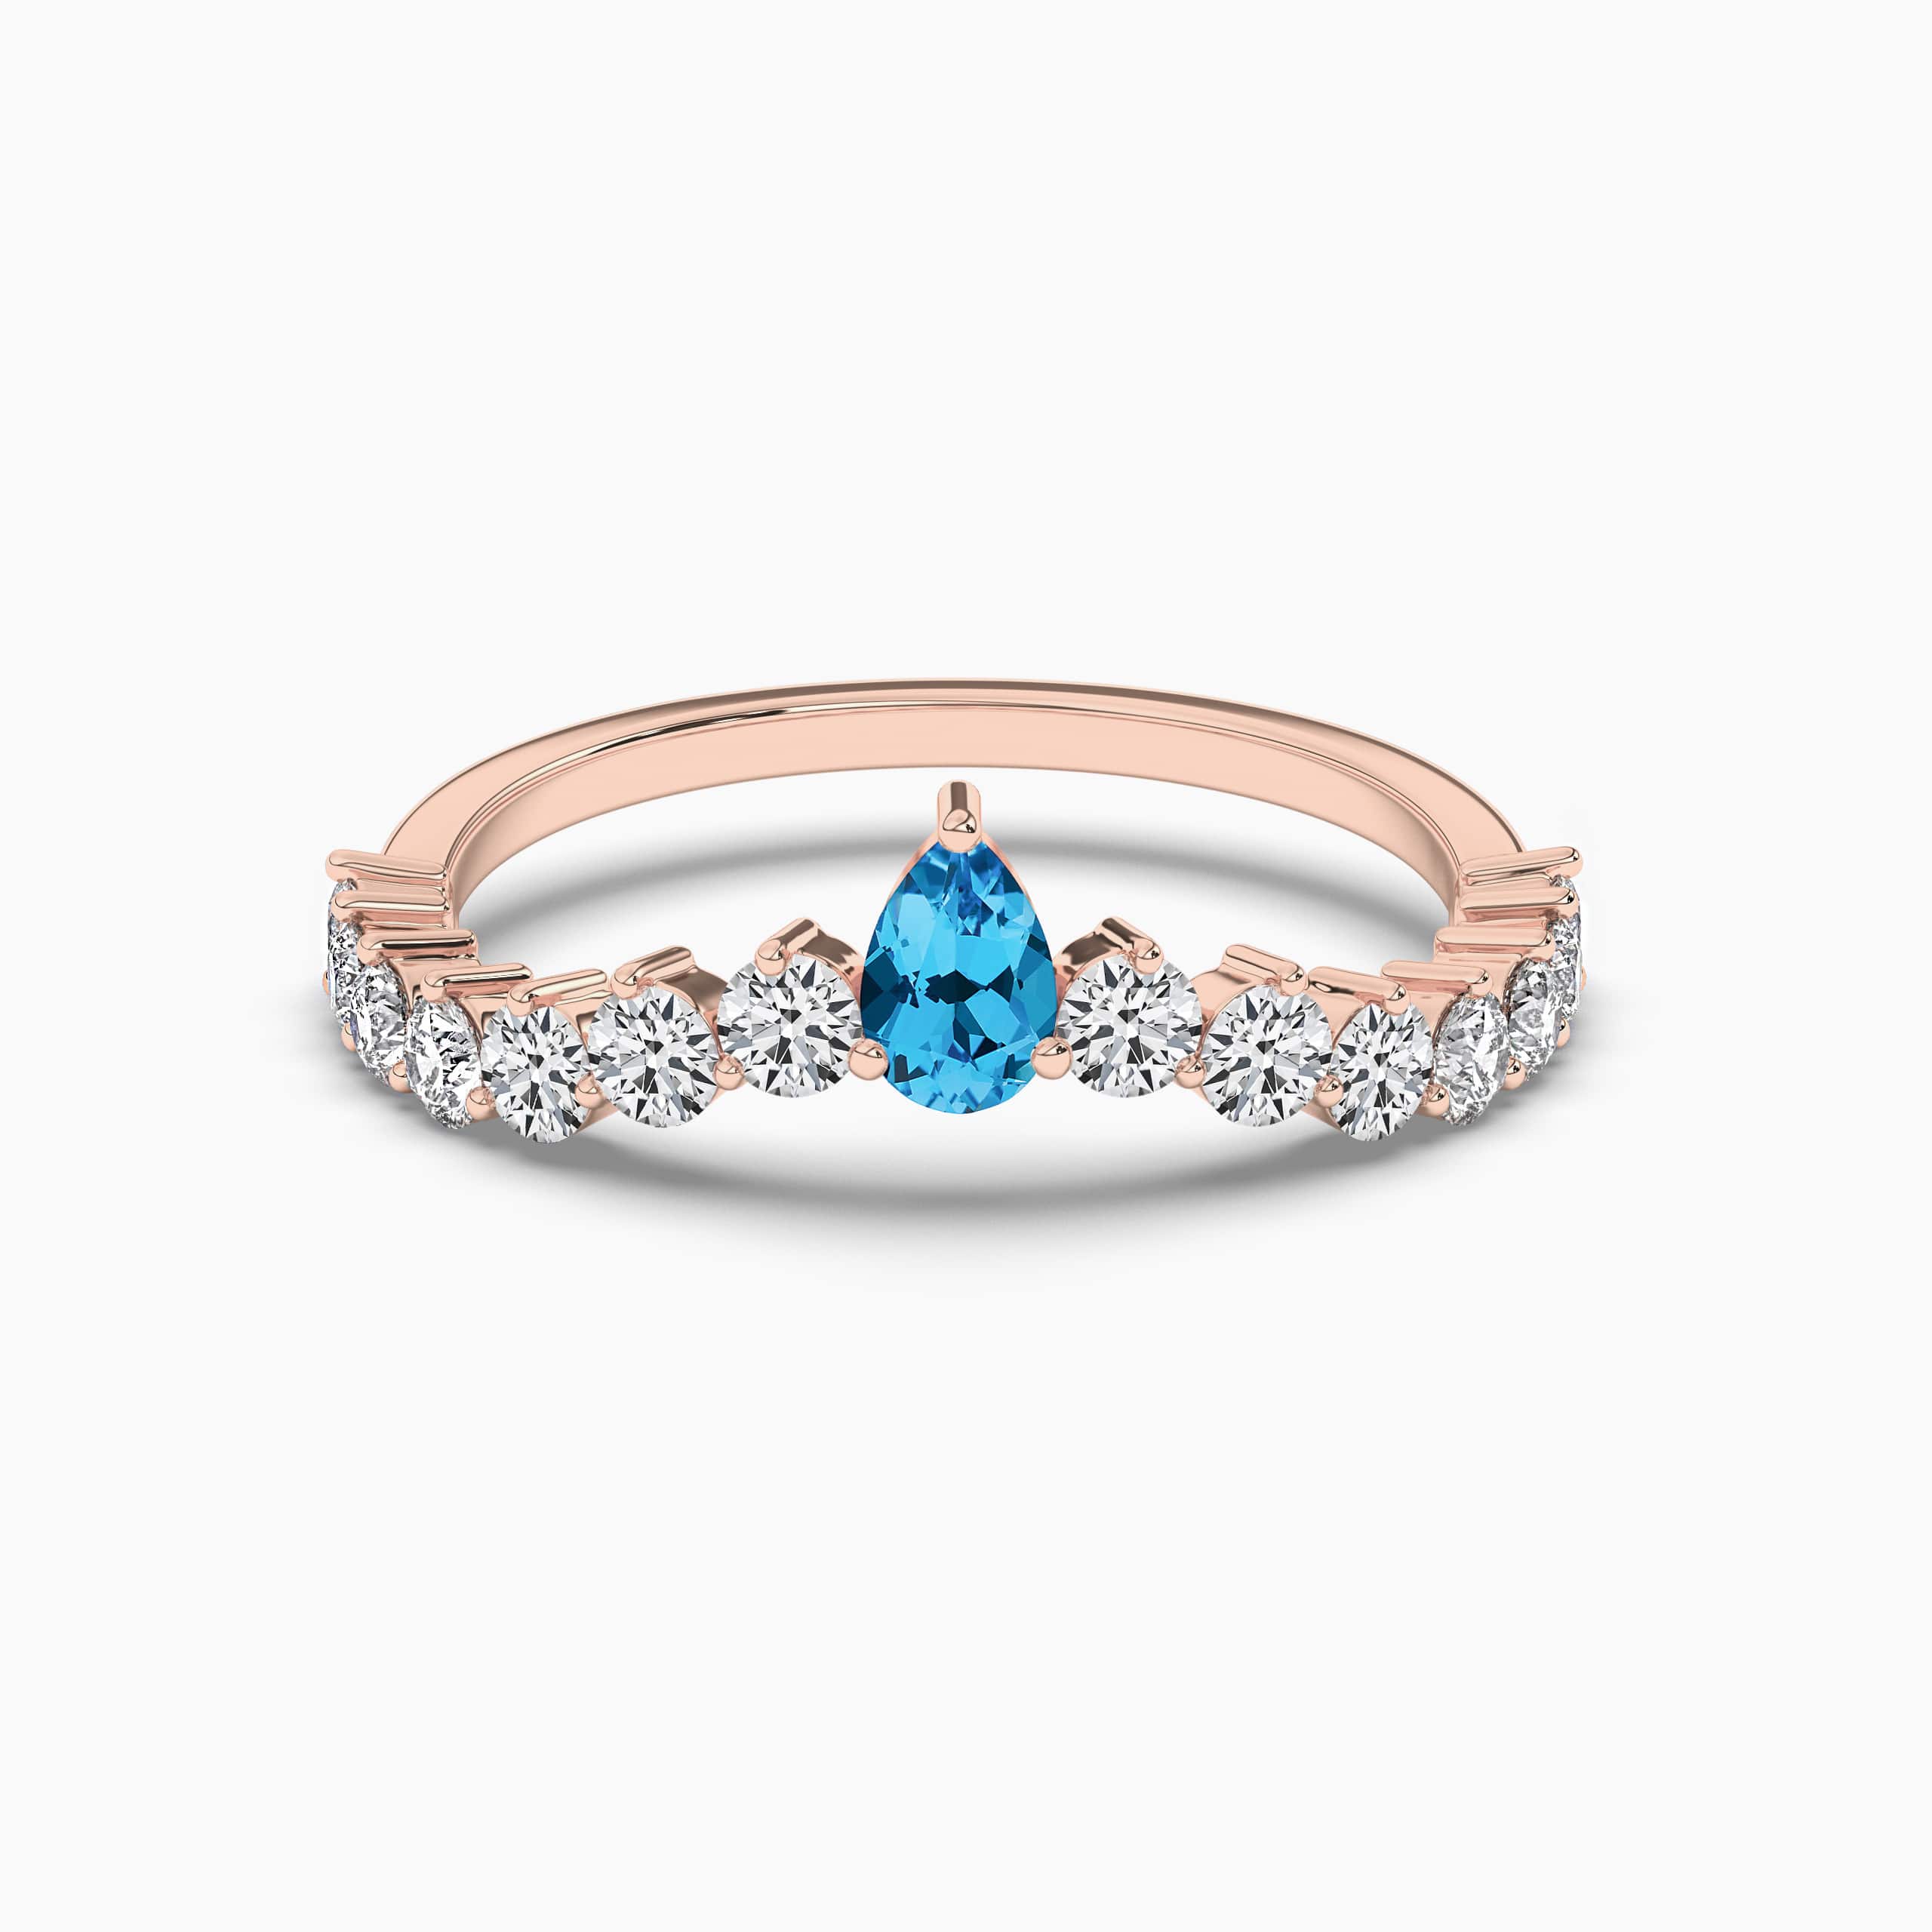 Pear Shaped Blue Topaz Engagement Ring, Blue Topaz and Diamonds Wedding Ring